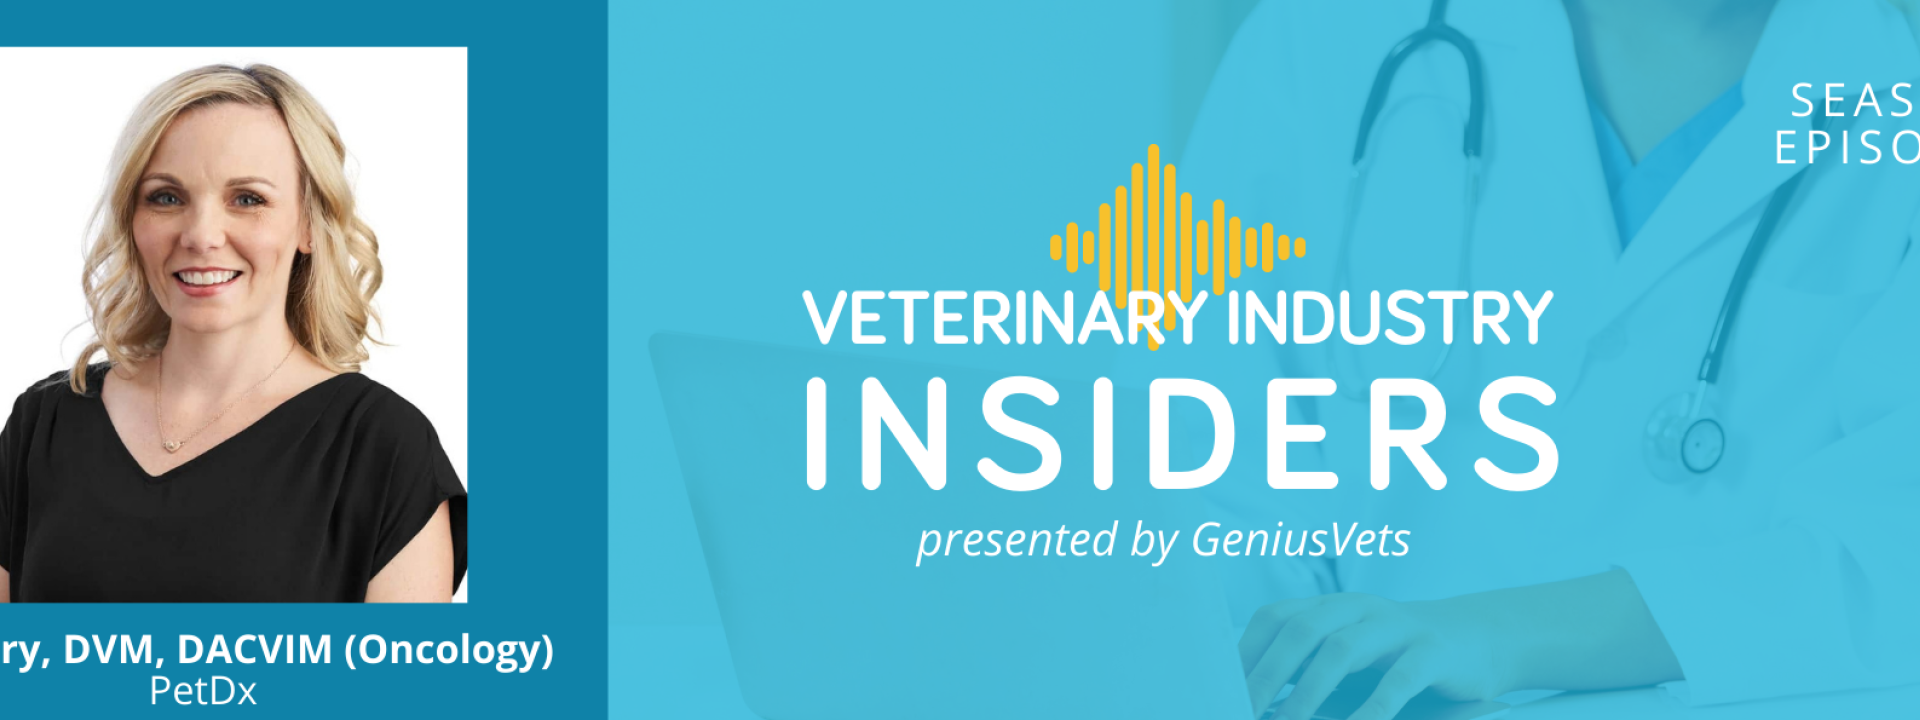 Veterinary Industry Insiders Presented by GeniusVets With Dr. Andi Flory